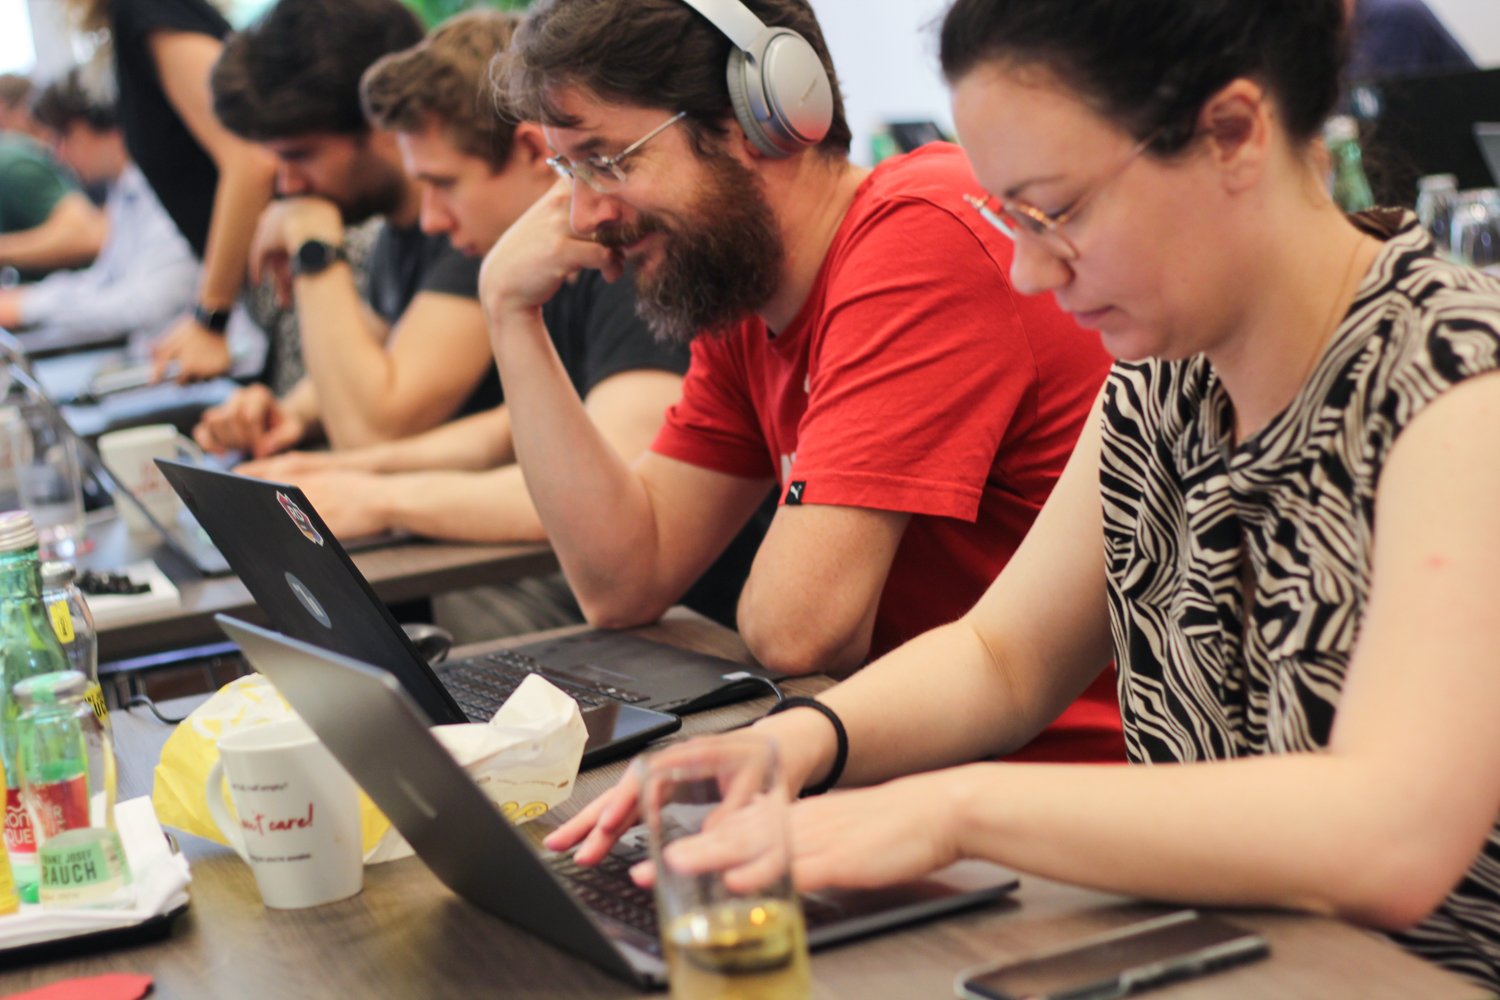 Nina, Balazs, and other employees sitting in a row at their laptops, hacking away during the LKWW Hackathon